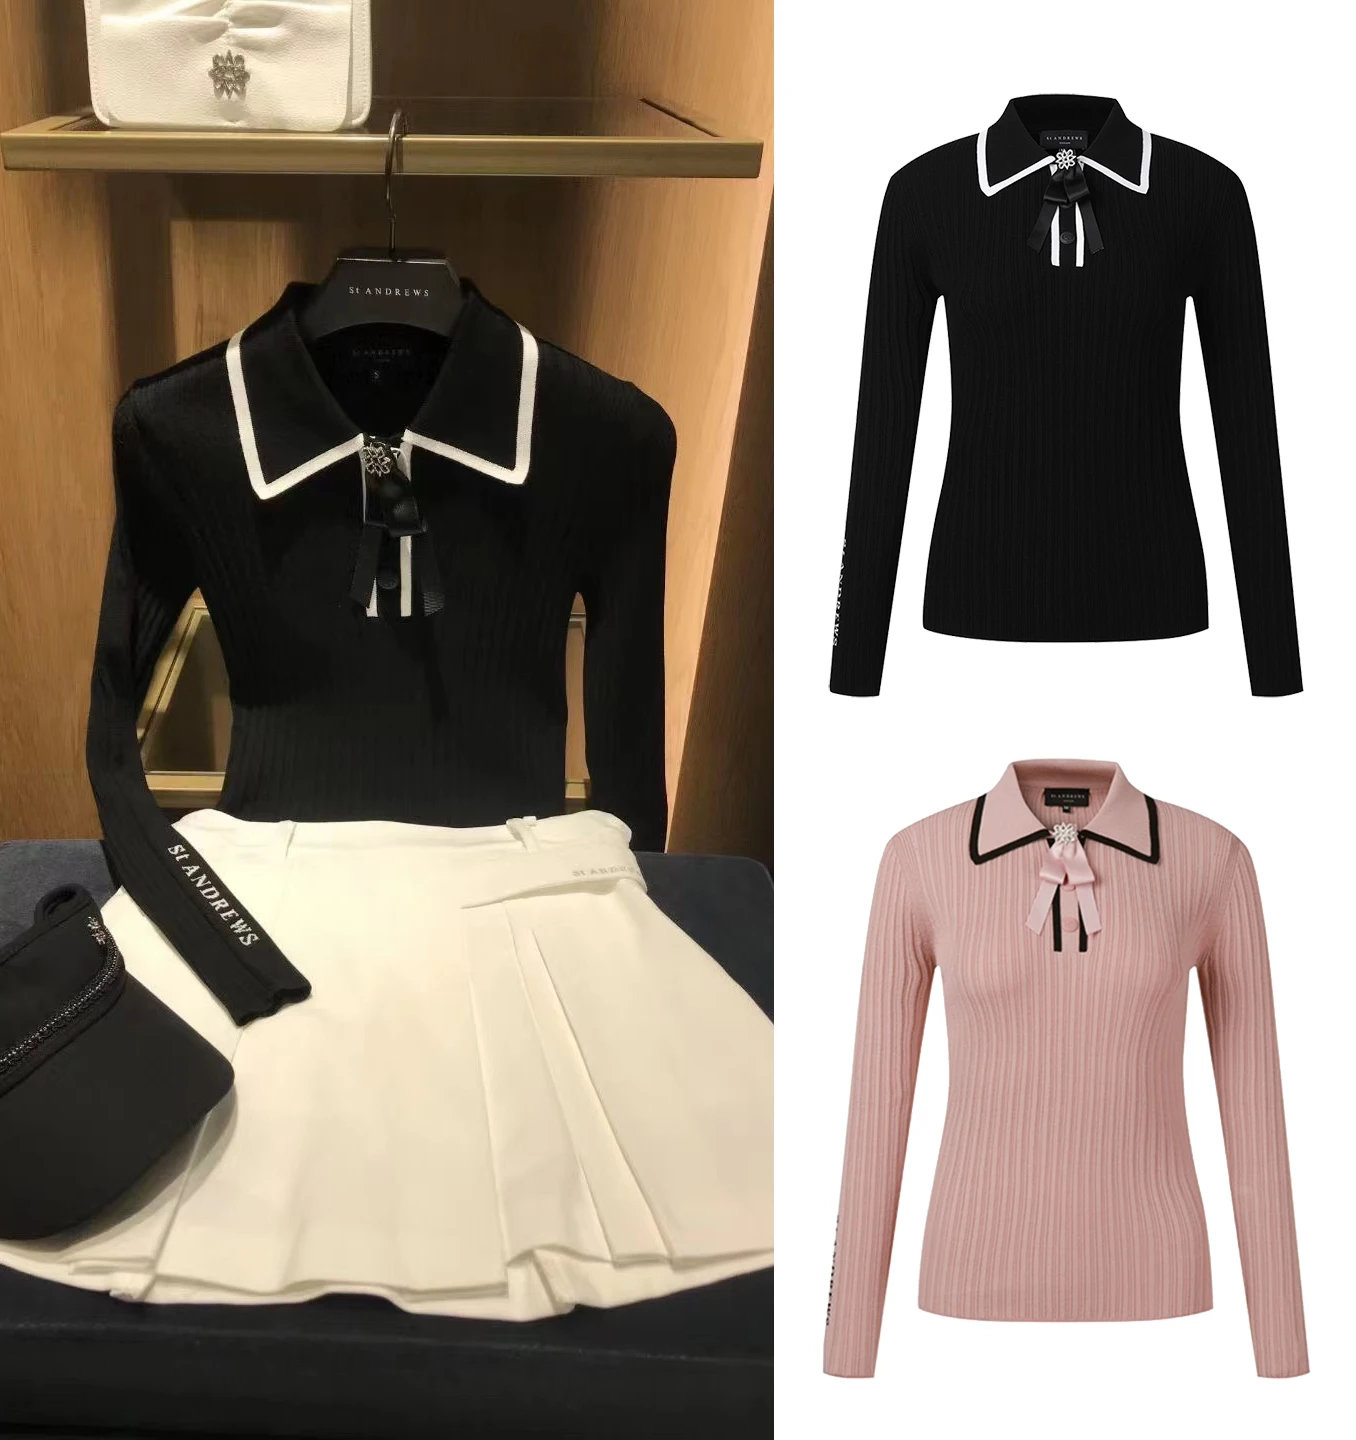 Autumn/Winter New Golf Shirts Women's Knit Polo Shirt Elastic Slim Fit Design Knit rib Shirt Pair With Lace Bow Golf Top